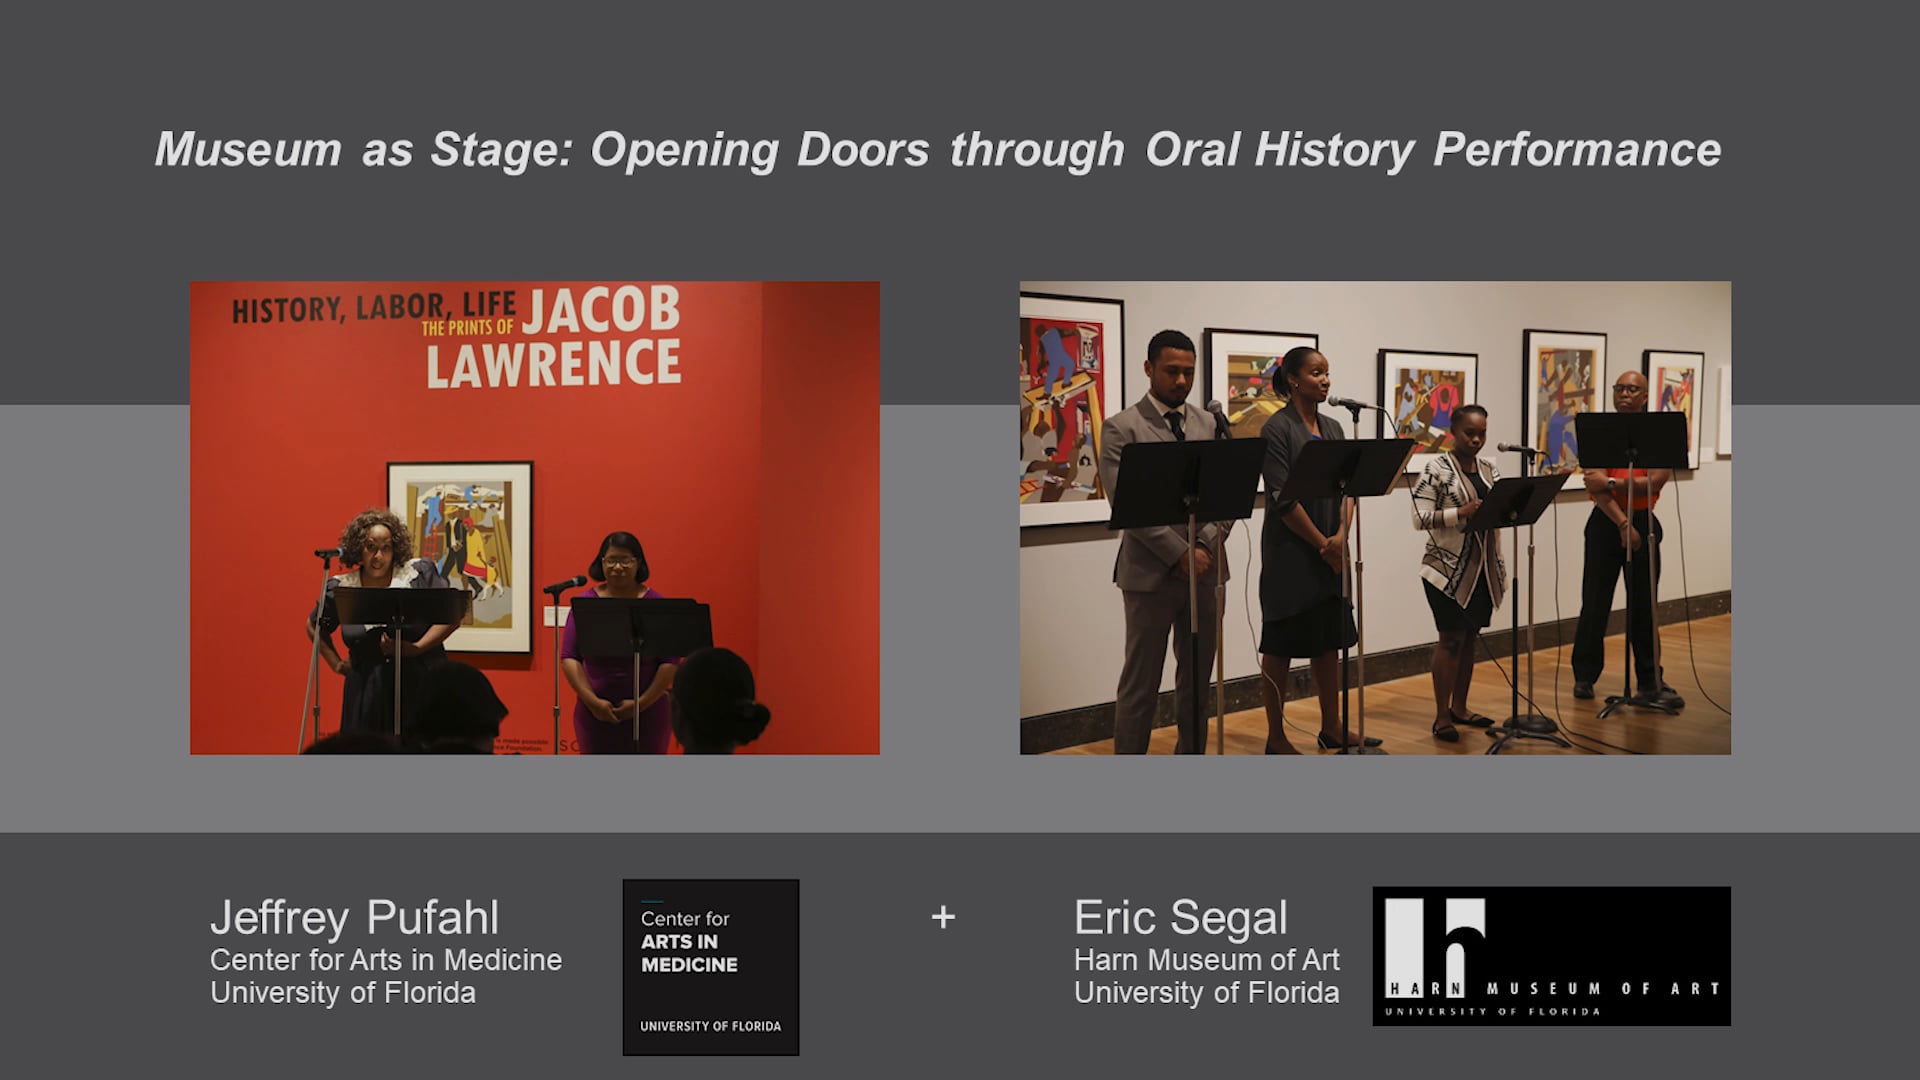 Museum As Stage: Opening Doors through Oral History Performance